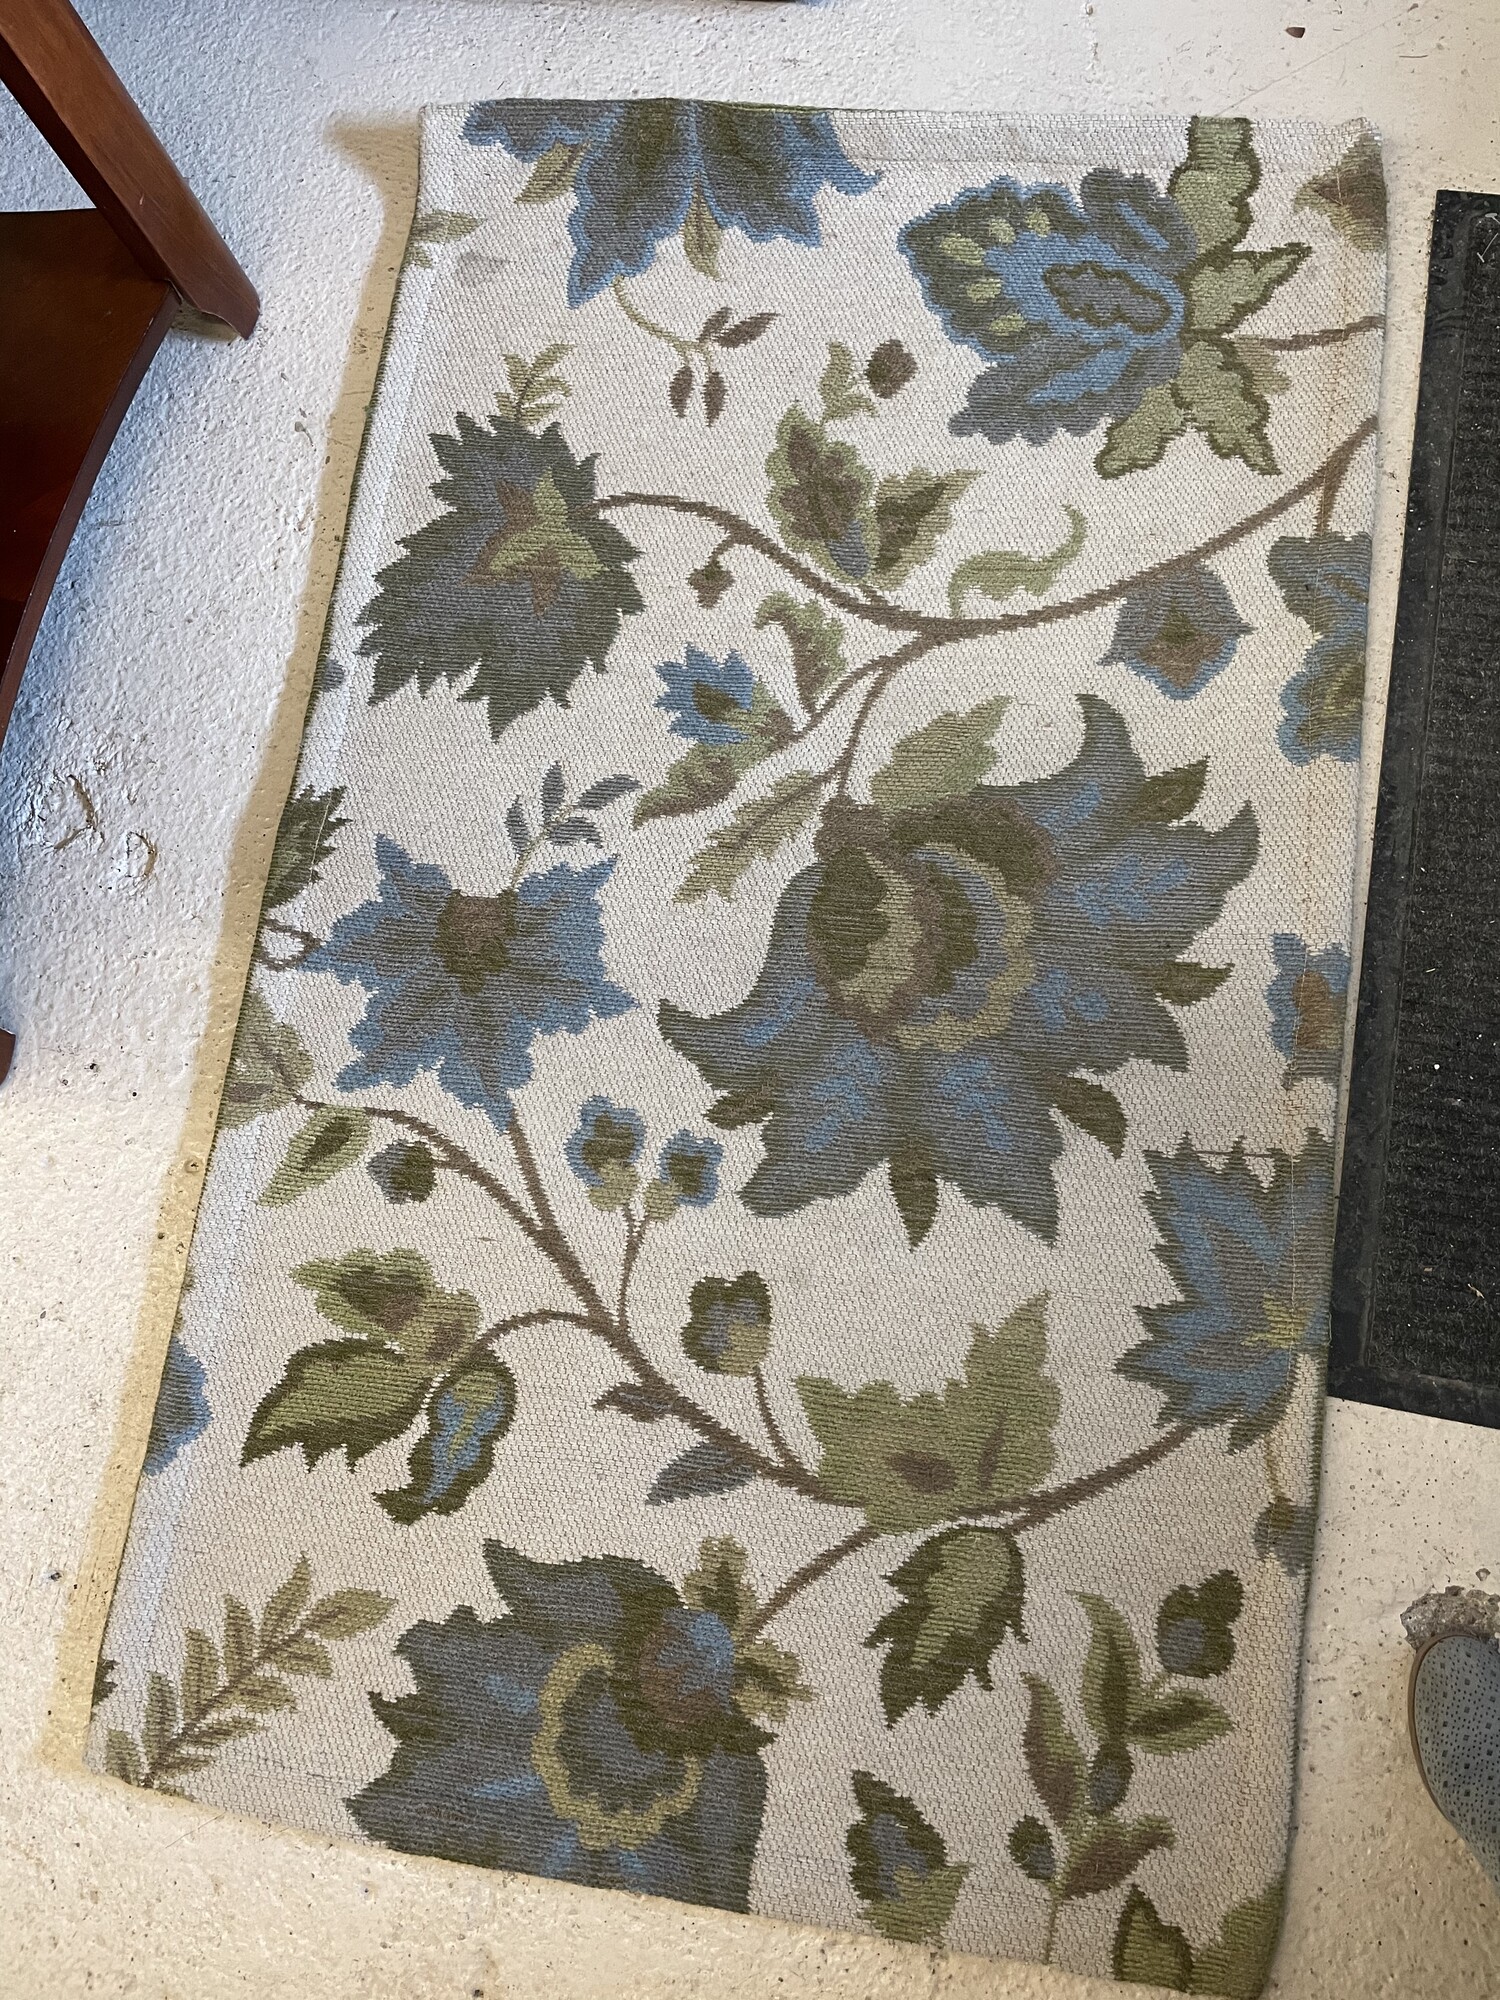 Threshold Area Rug
Cream, blue and green
Size: 4 x 2.5
Exellent condition